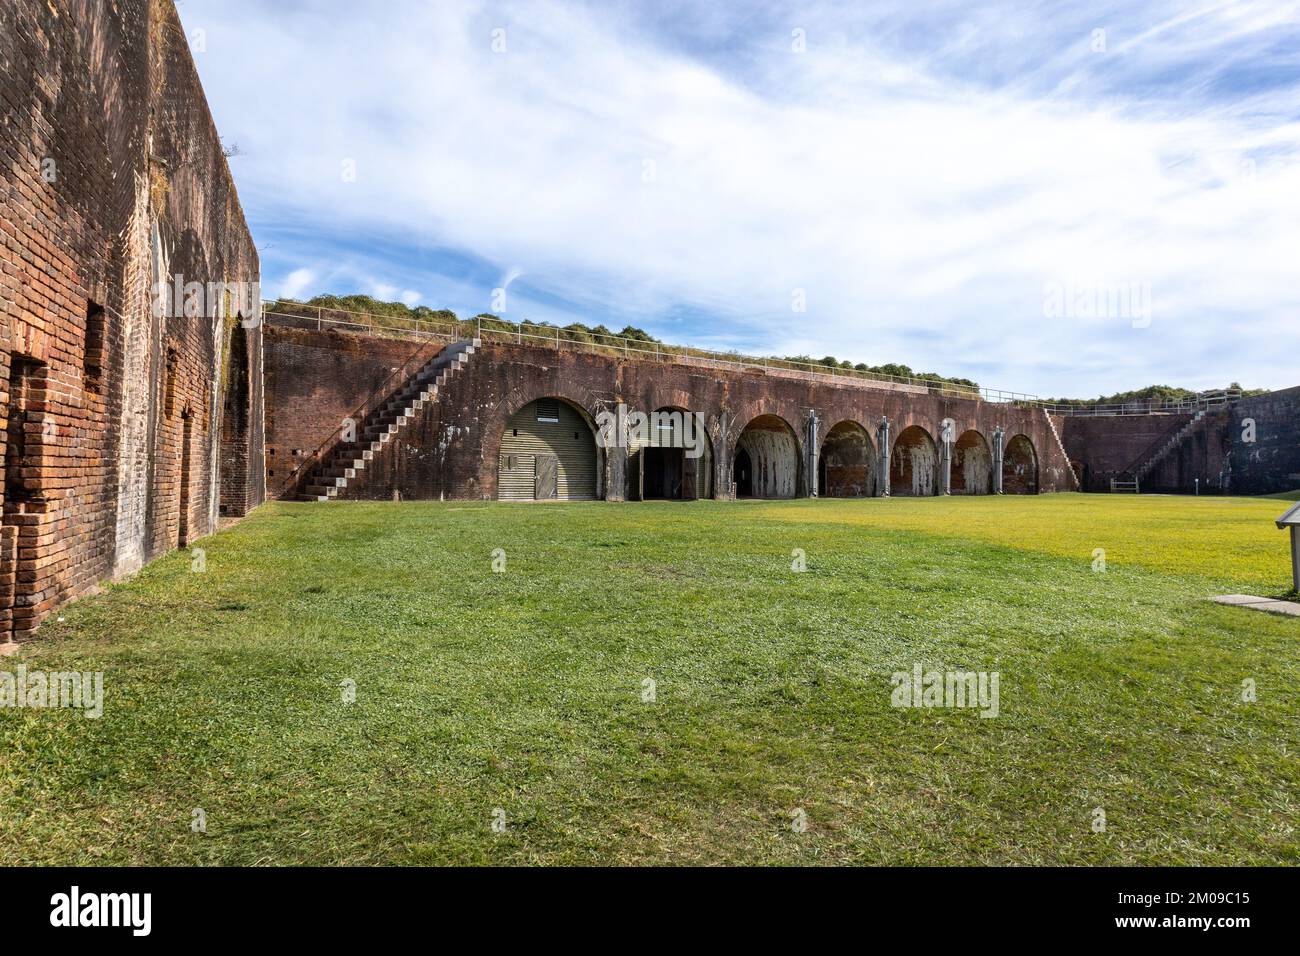 Fort Morgan Baldwin County Alabama United States A Historic Property Of The Alabama Historical Commission Built In 1813 On Mobile Point Stock Photo